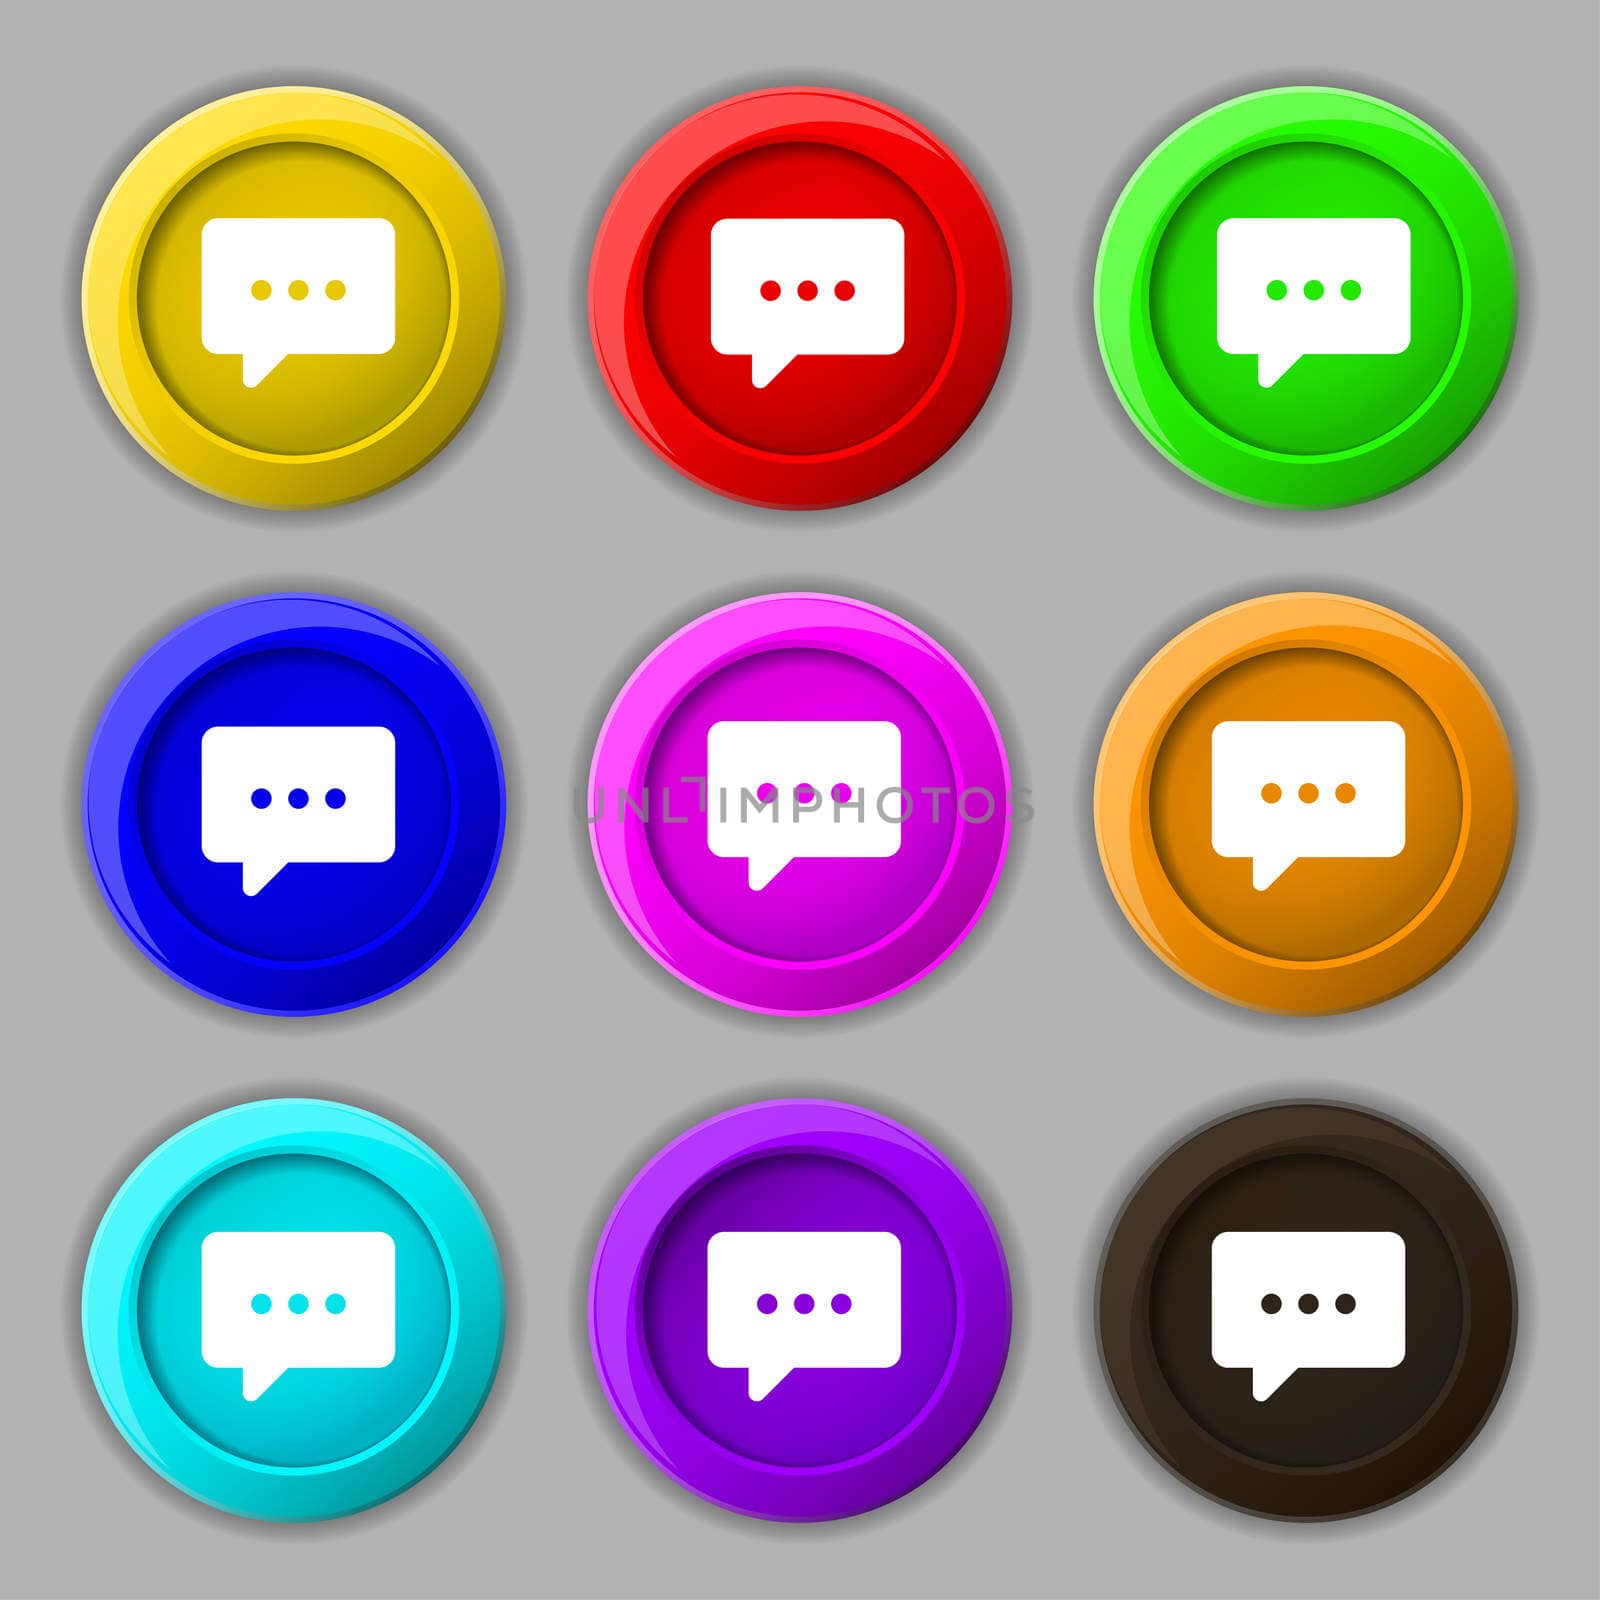 Cloud of thoughts icon sign. symbol on nine round colourful buttons. illustration